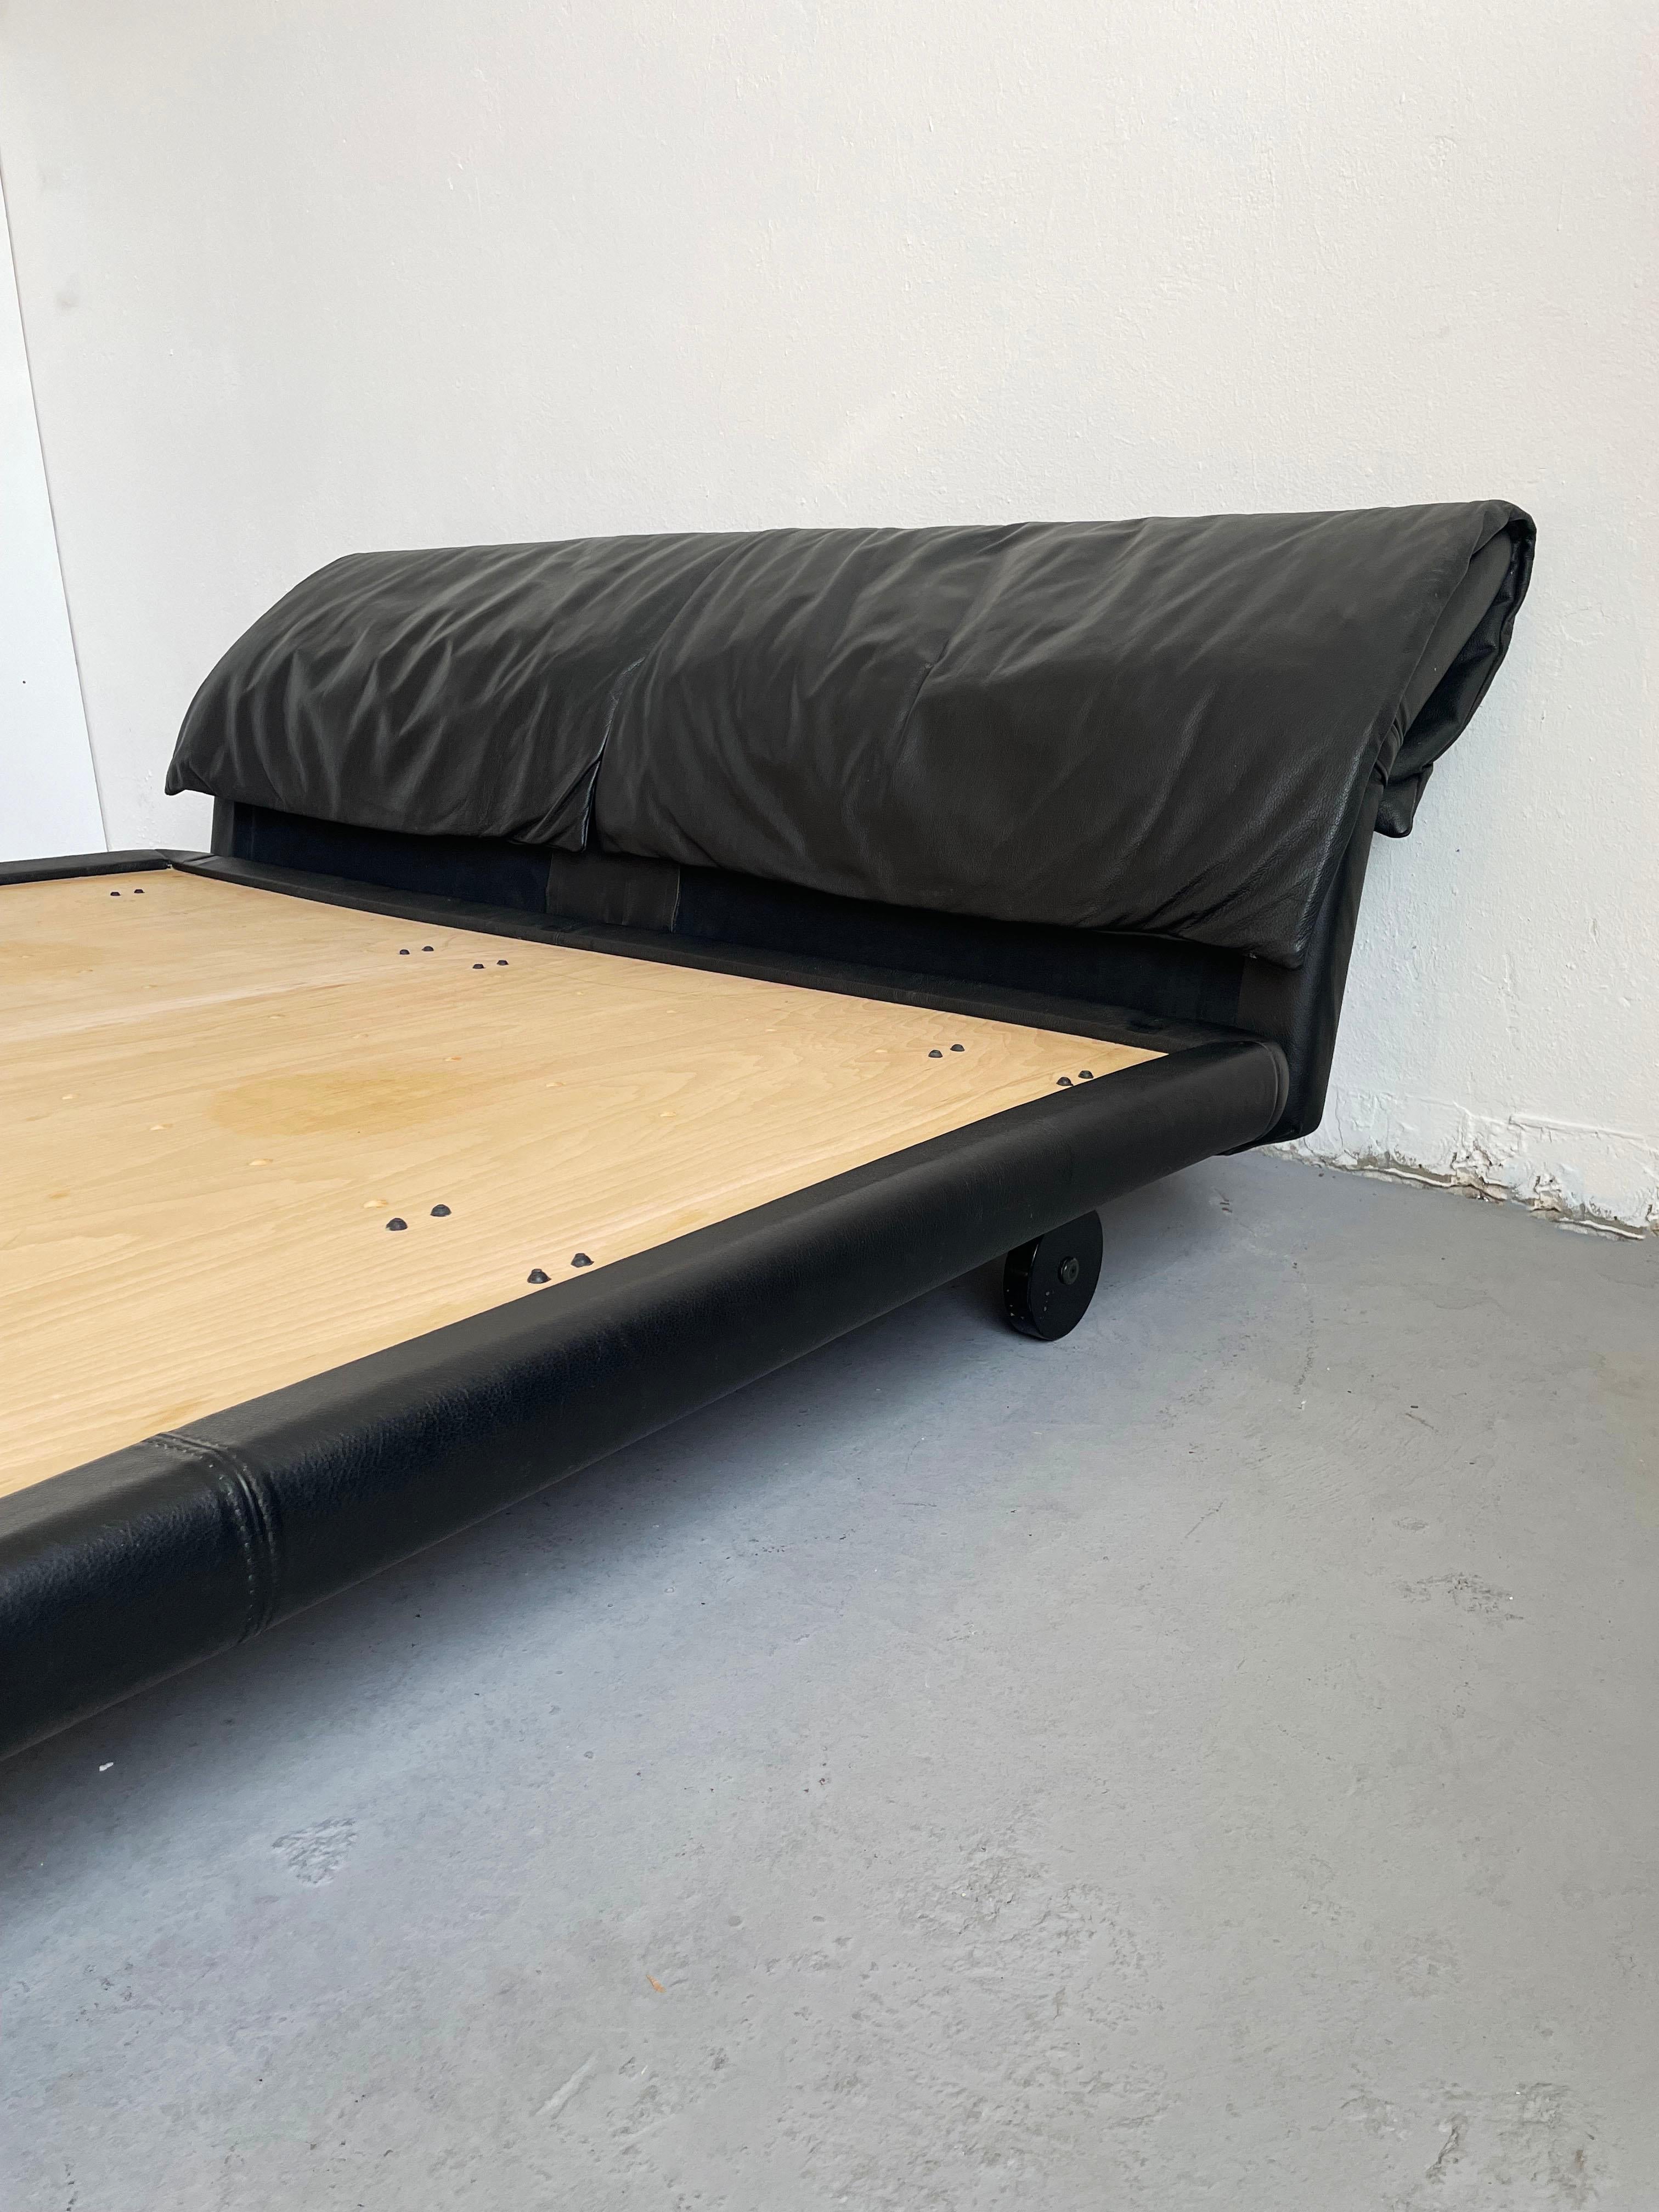 Italian Afra & Tobia Scarpa for Molteni 'Marlo' Bed in Black Leather, Italy 1980s For Sale